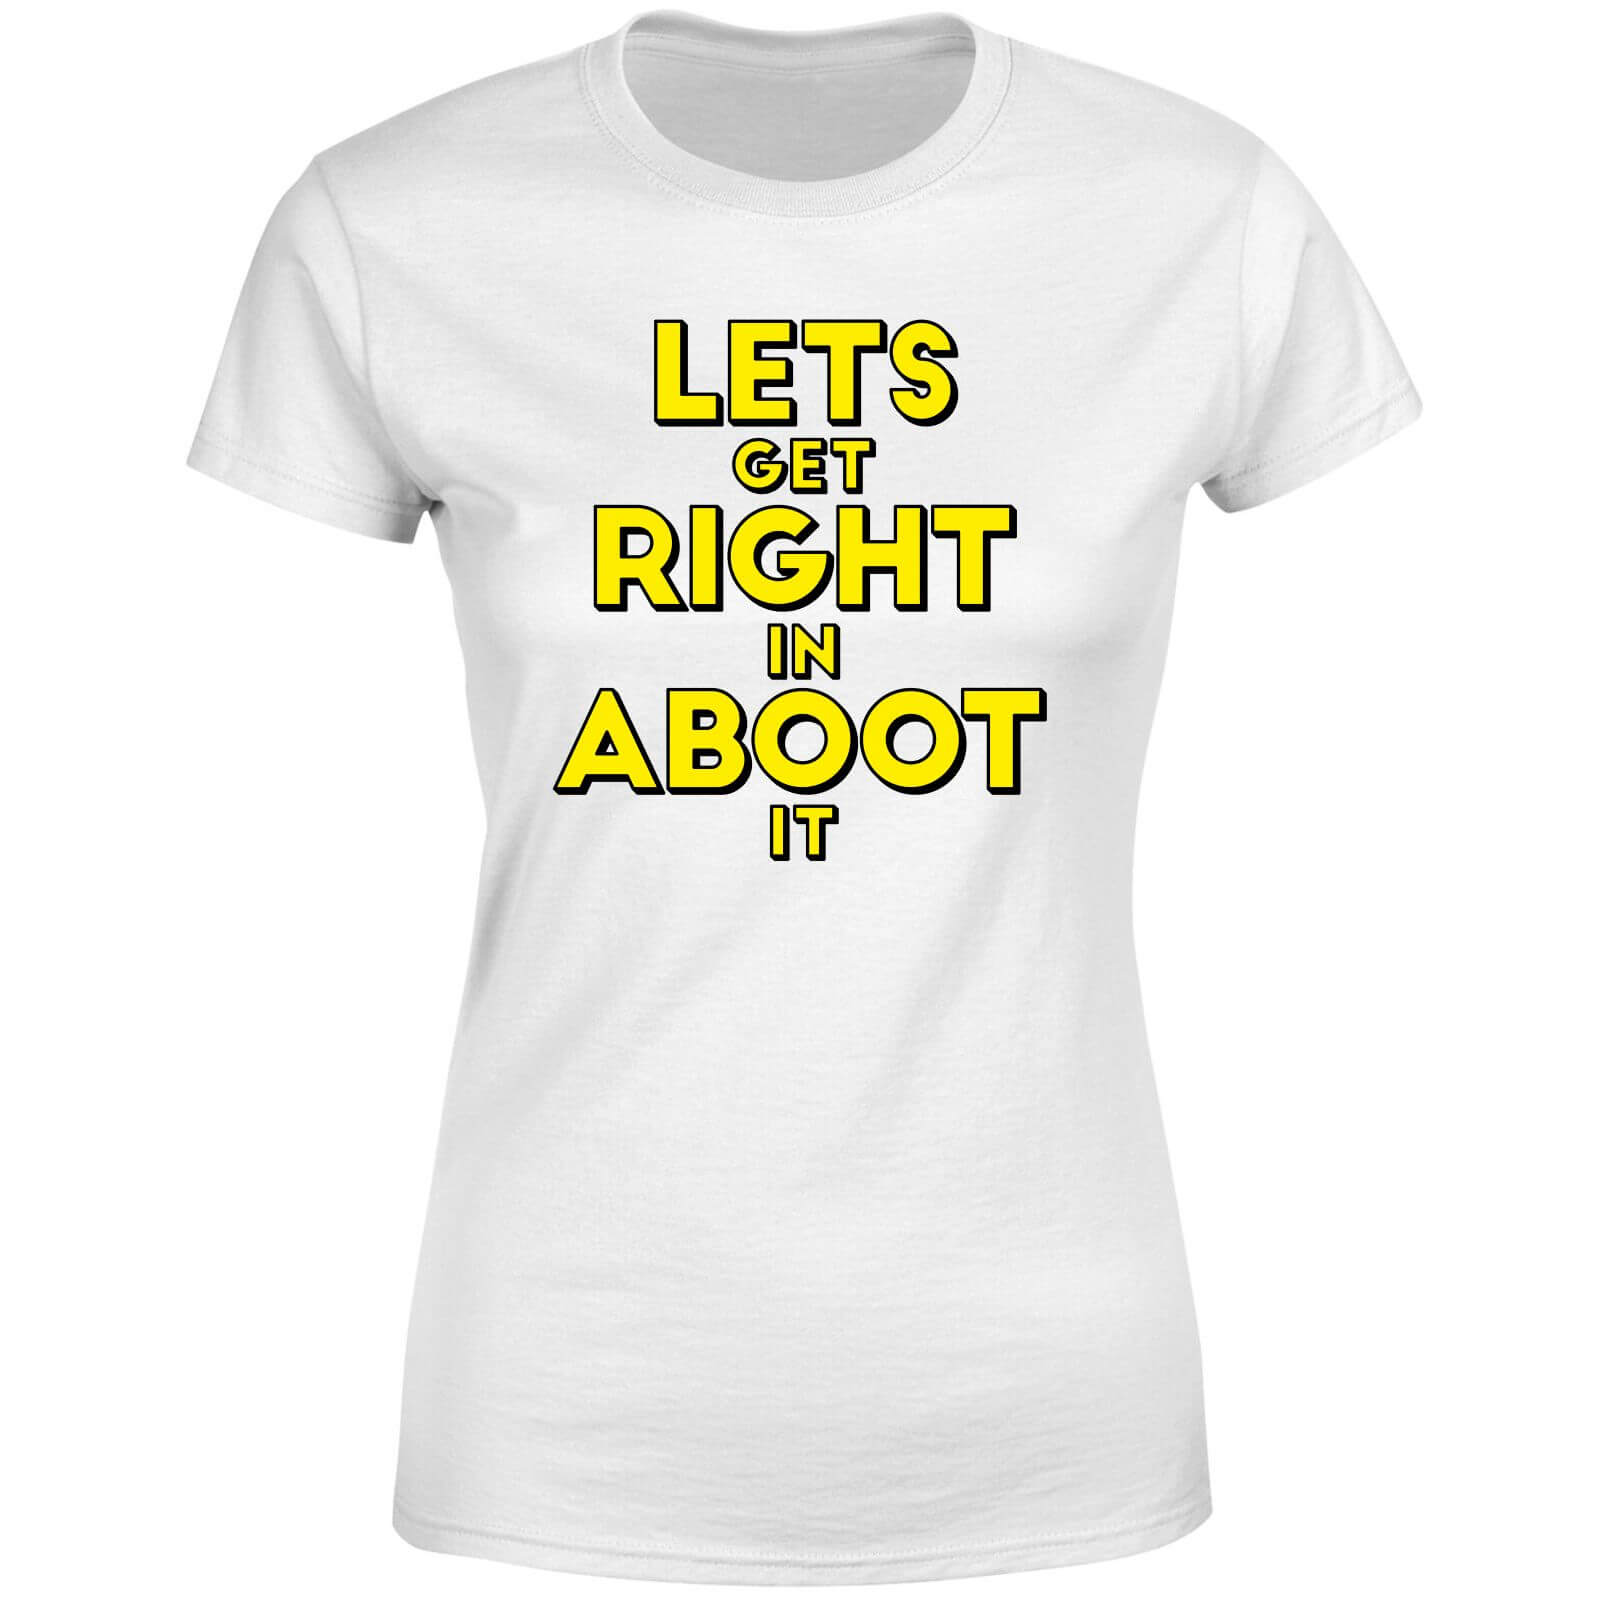 Let's Get Right In Aboot It Women's T-Shirt - White - 3XL - White